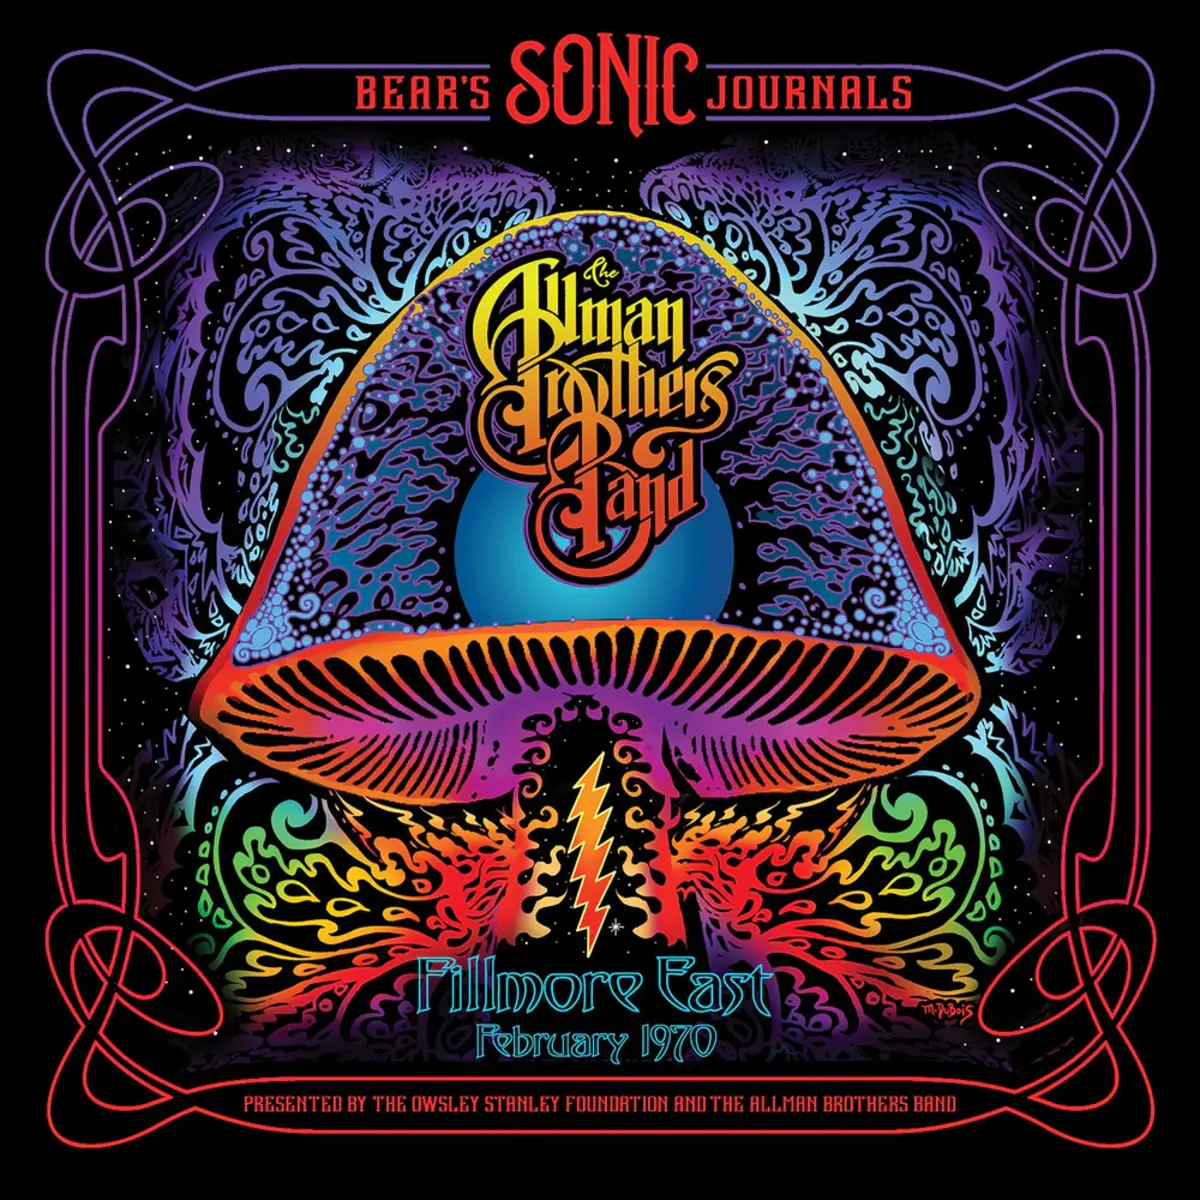 The Allman Brothers Band's "Bear's Sonic Journals: Fillmore East, February 1970 now comes on pink vinyl for a campaign to support cancer patients and their caregivers.